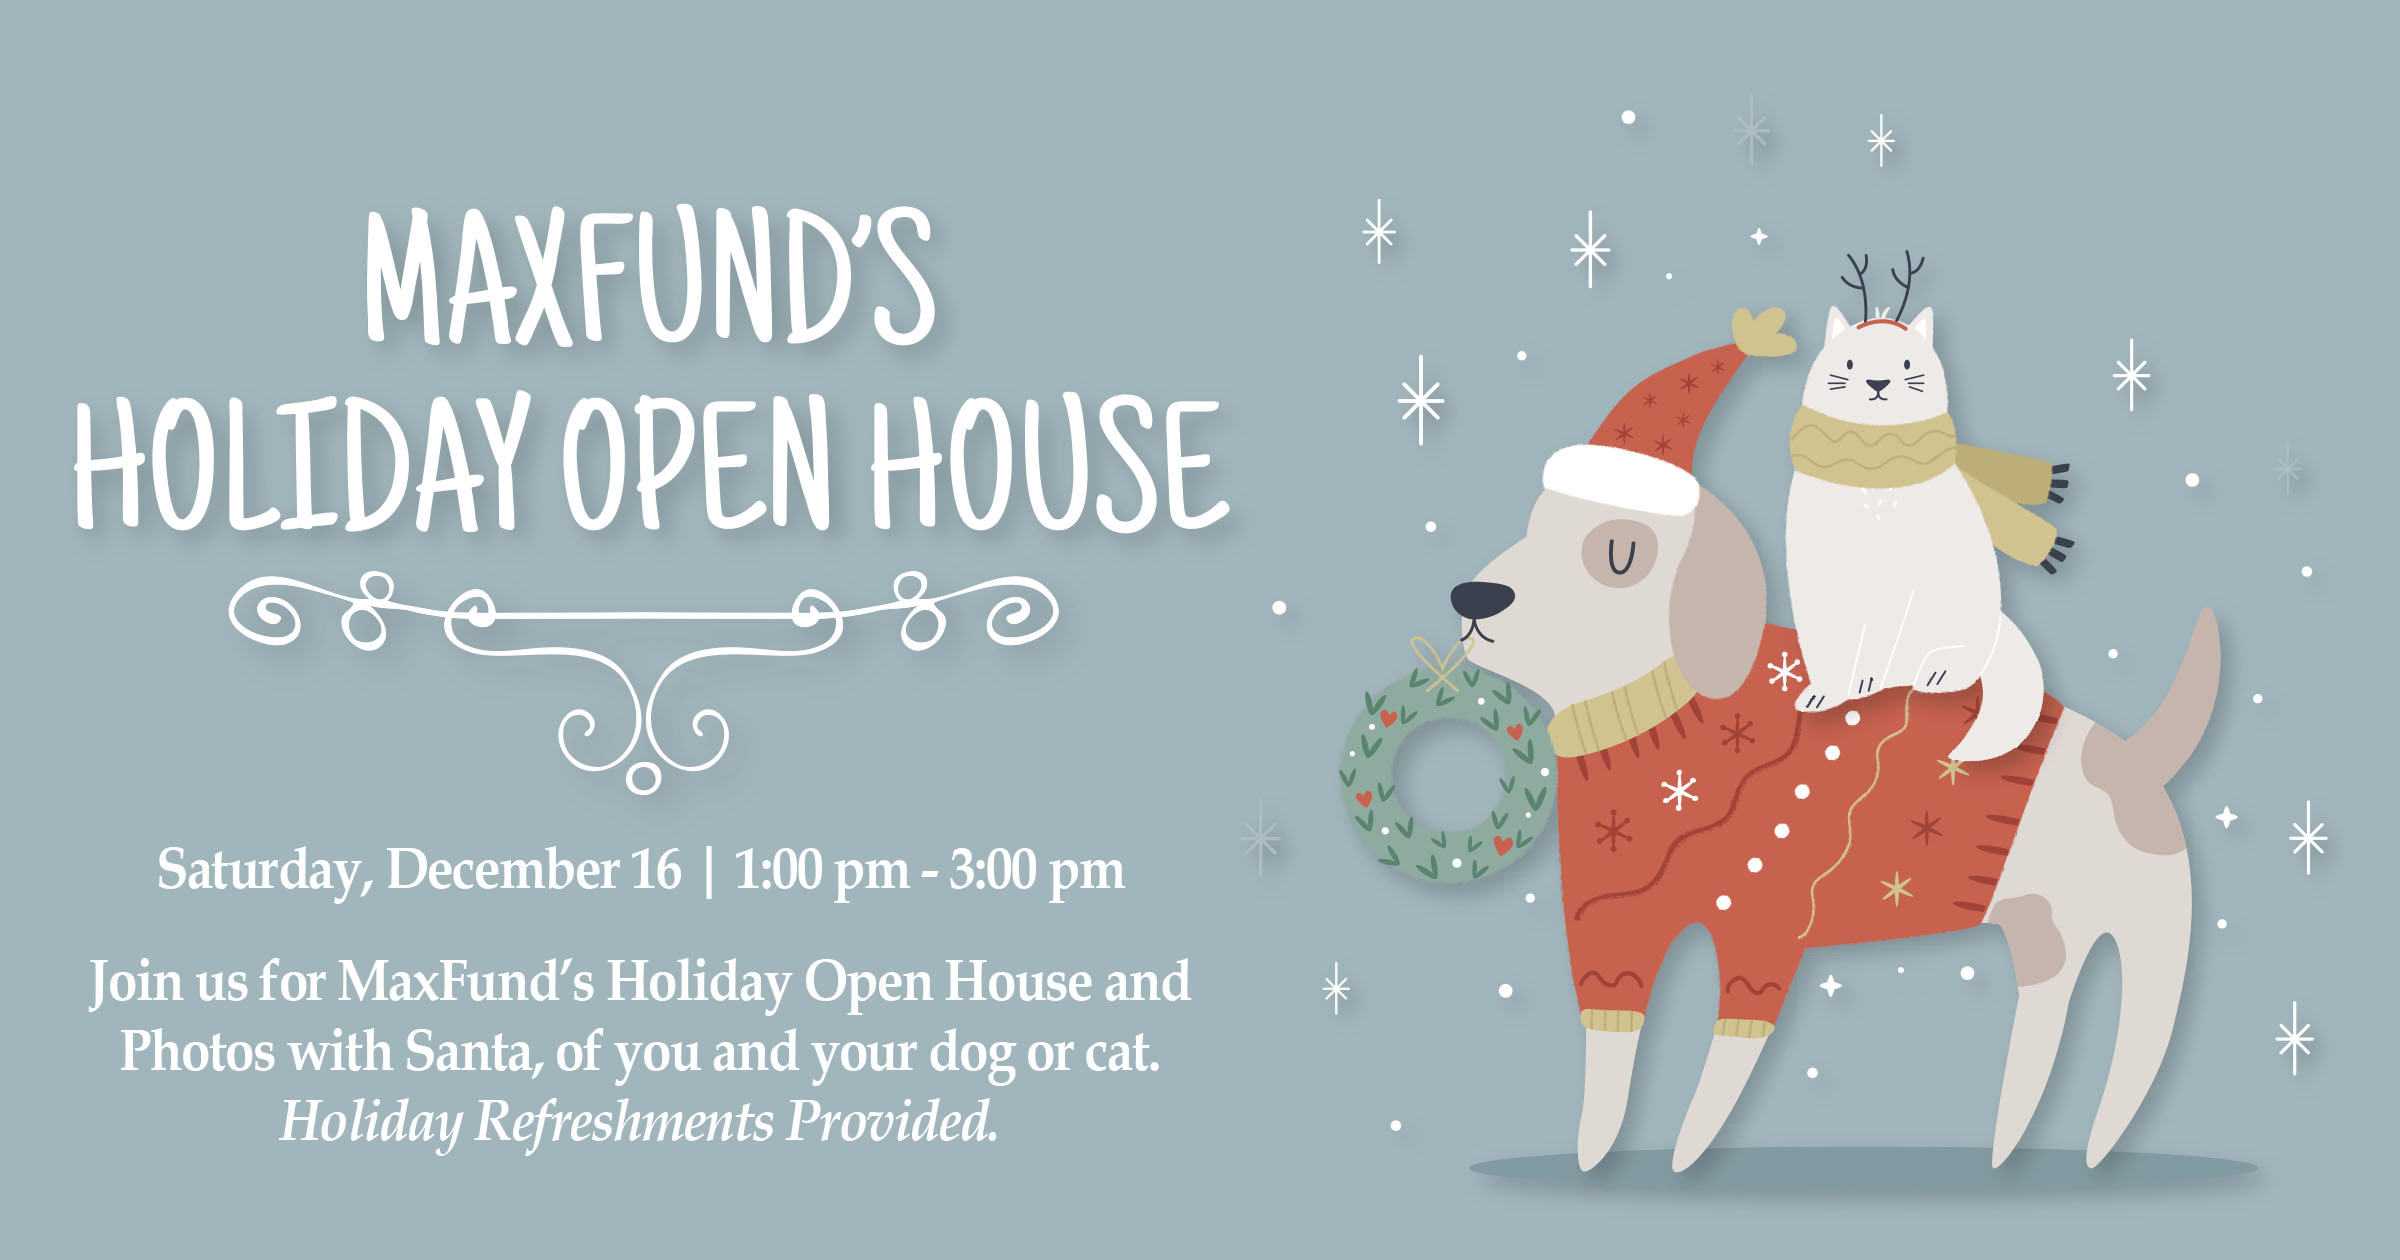 
Holiday Open House